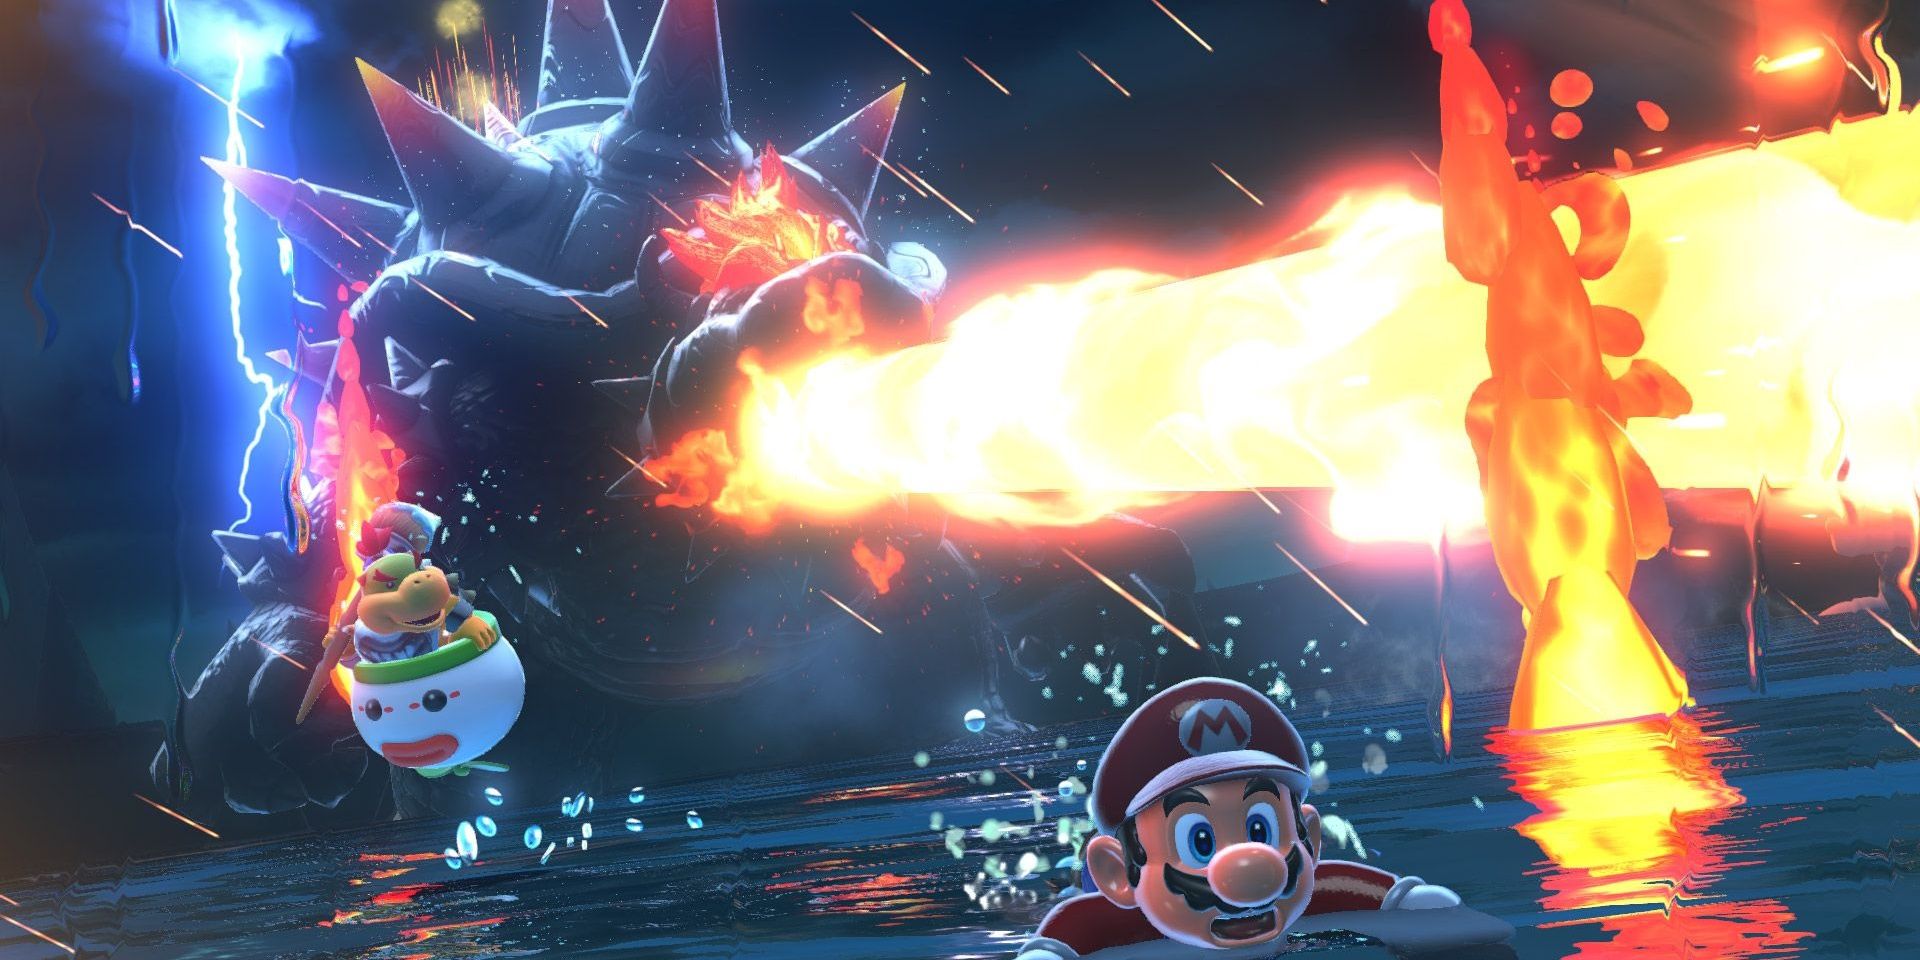 Fury Bowser chasing Mario in Bowser's Fury